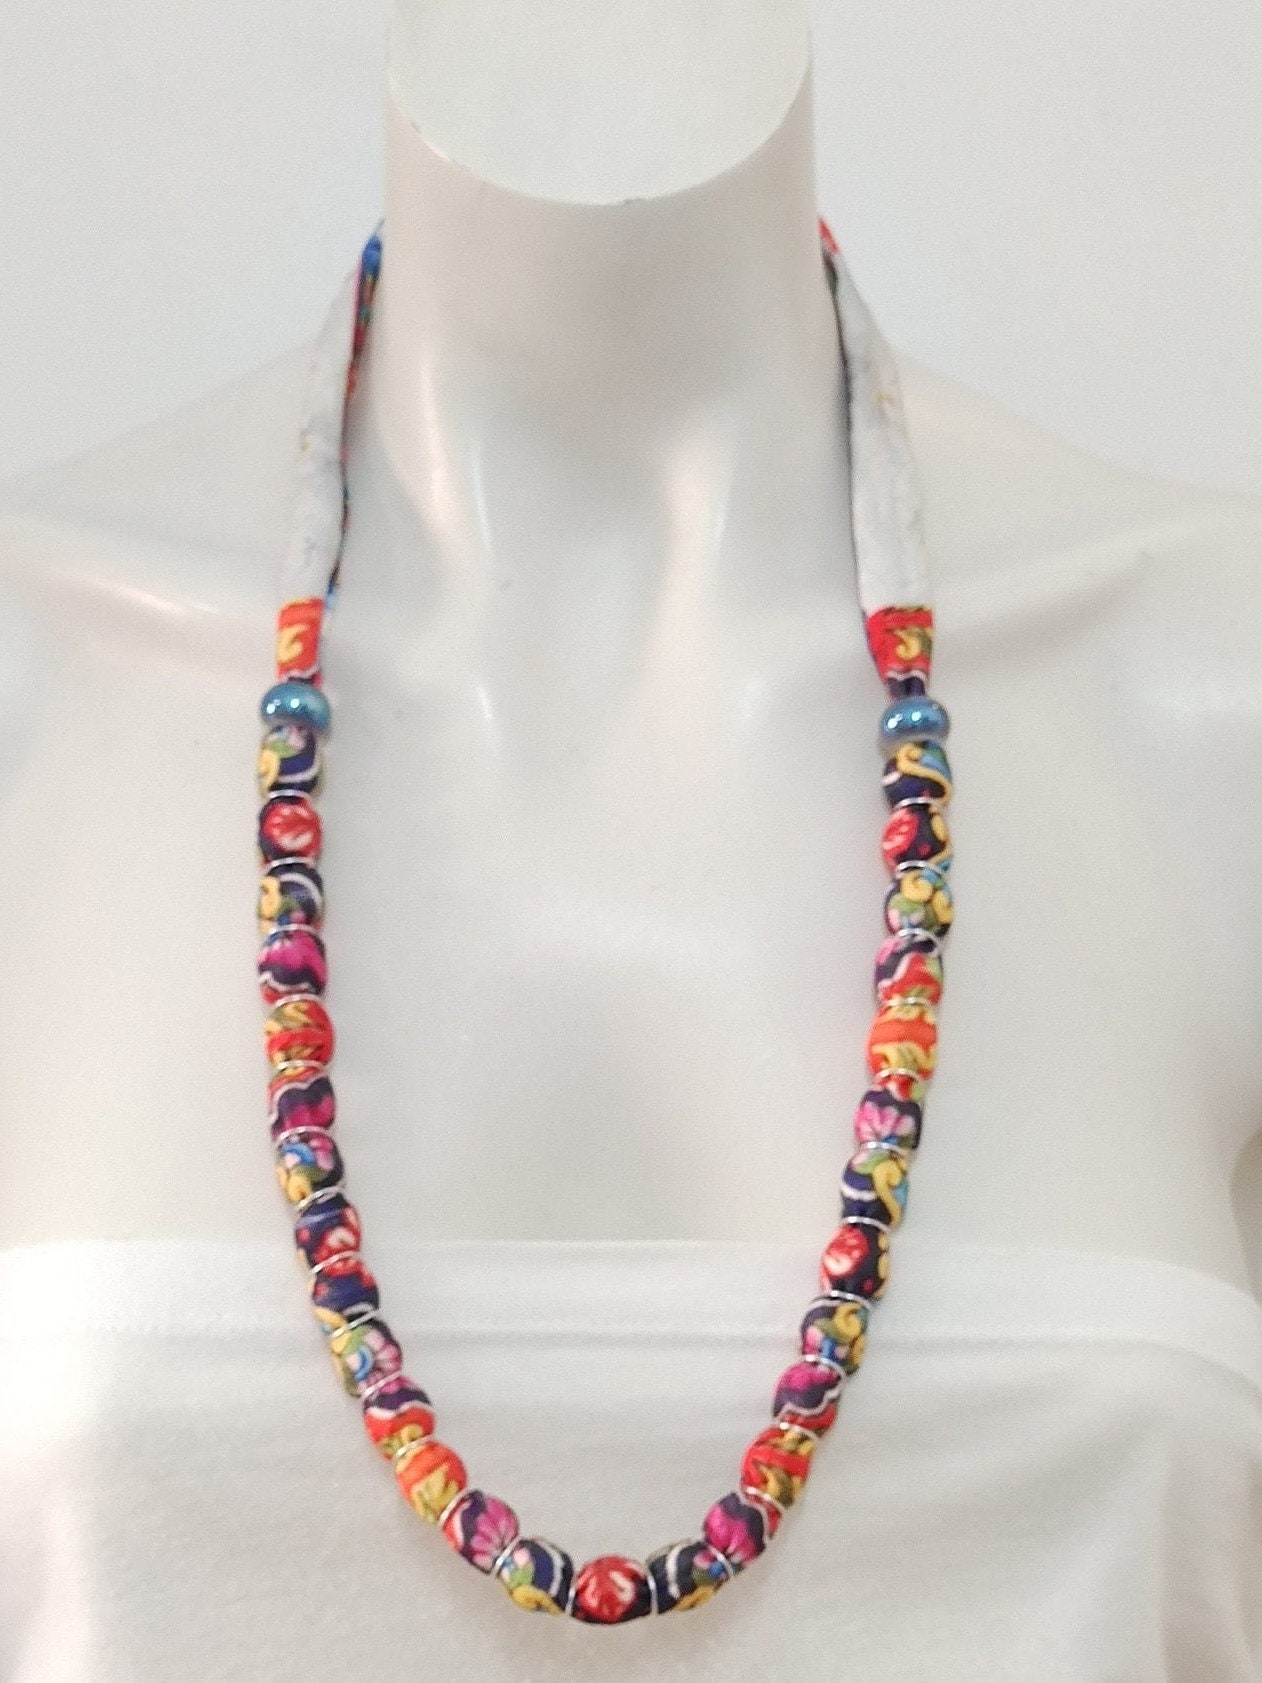 Boho Fabric Necklace Textile Floral Choker for Women Bead - Etsy